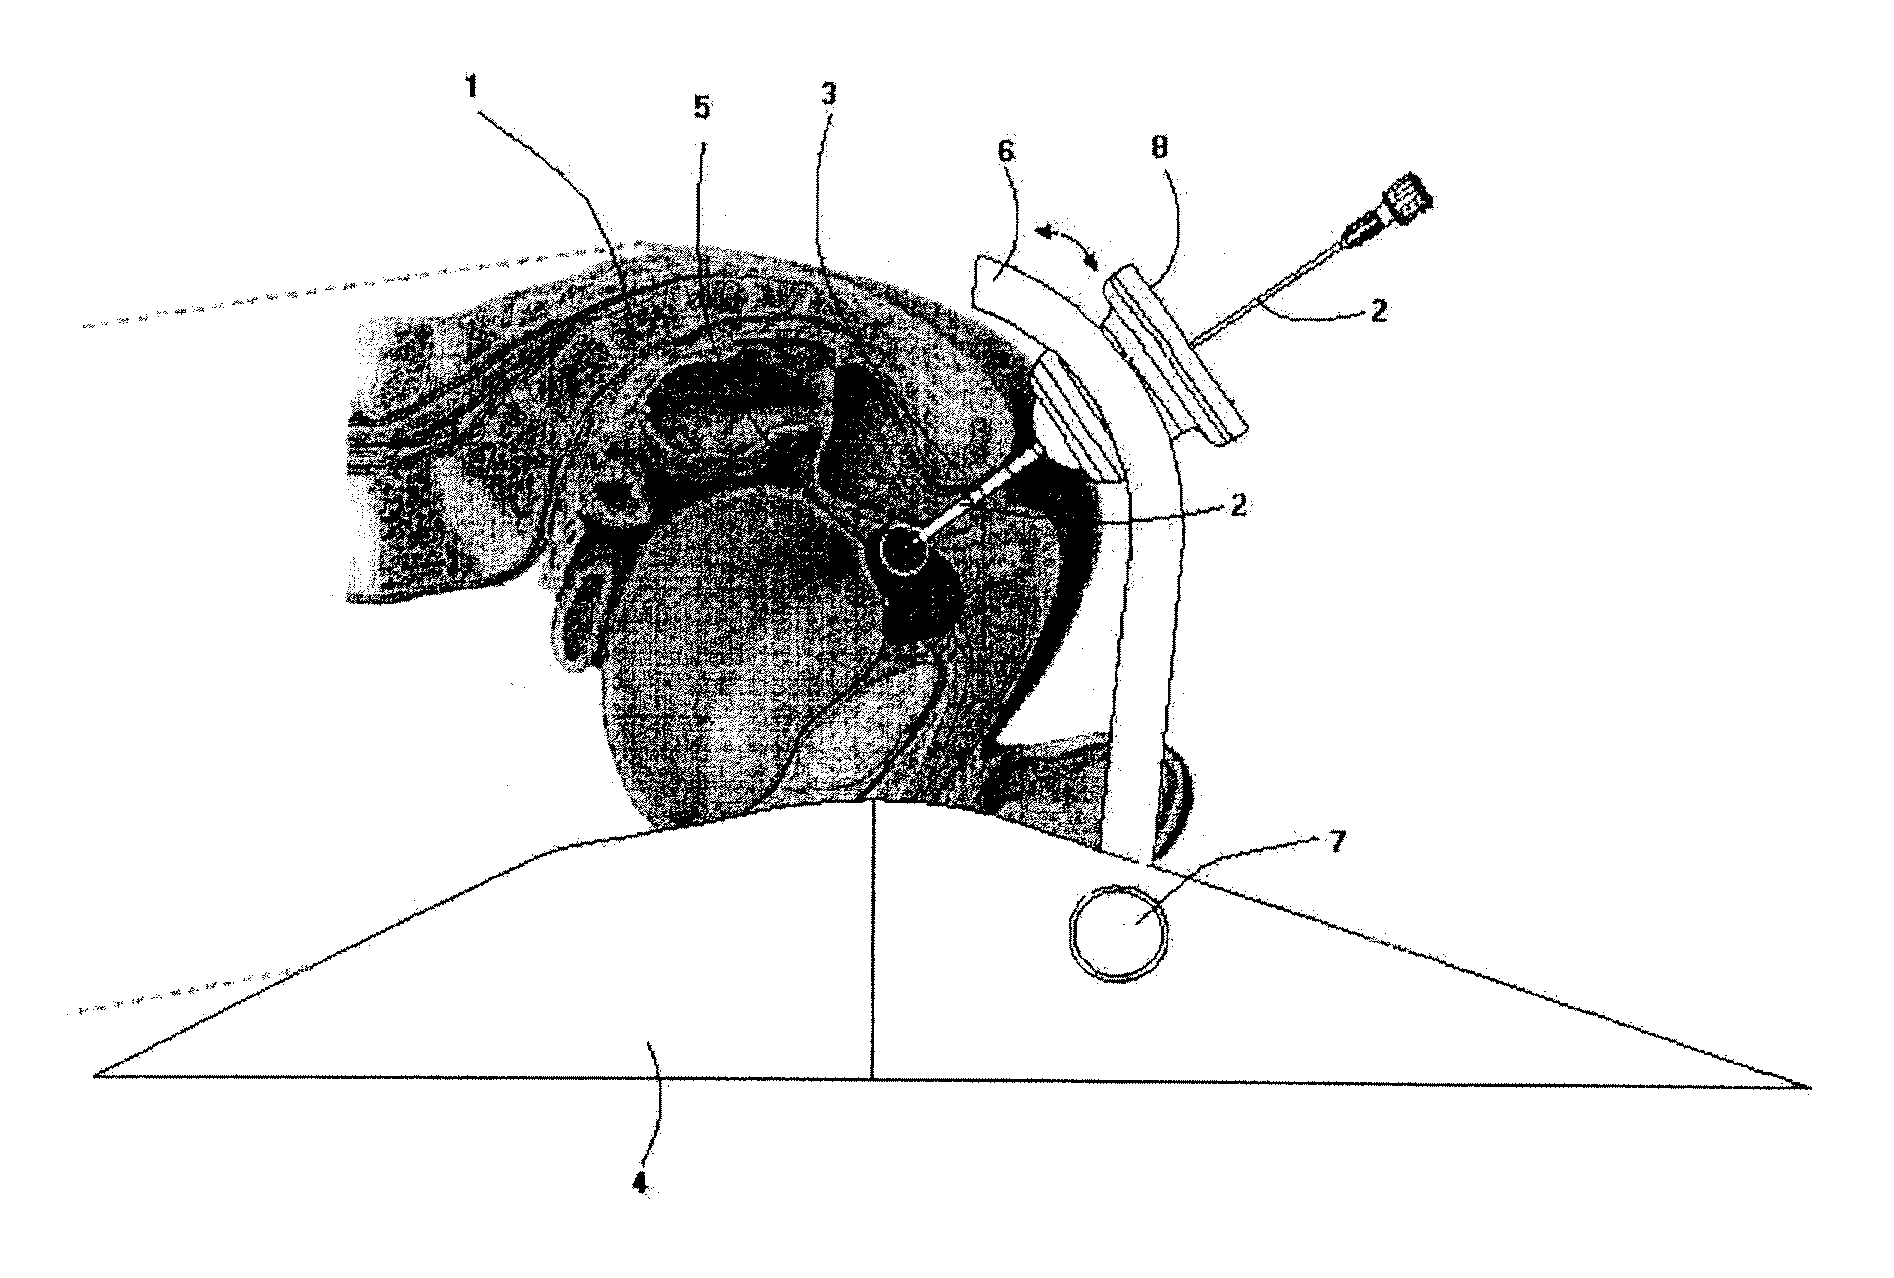 Method and apparatus for MR-guided biopsy